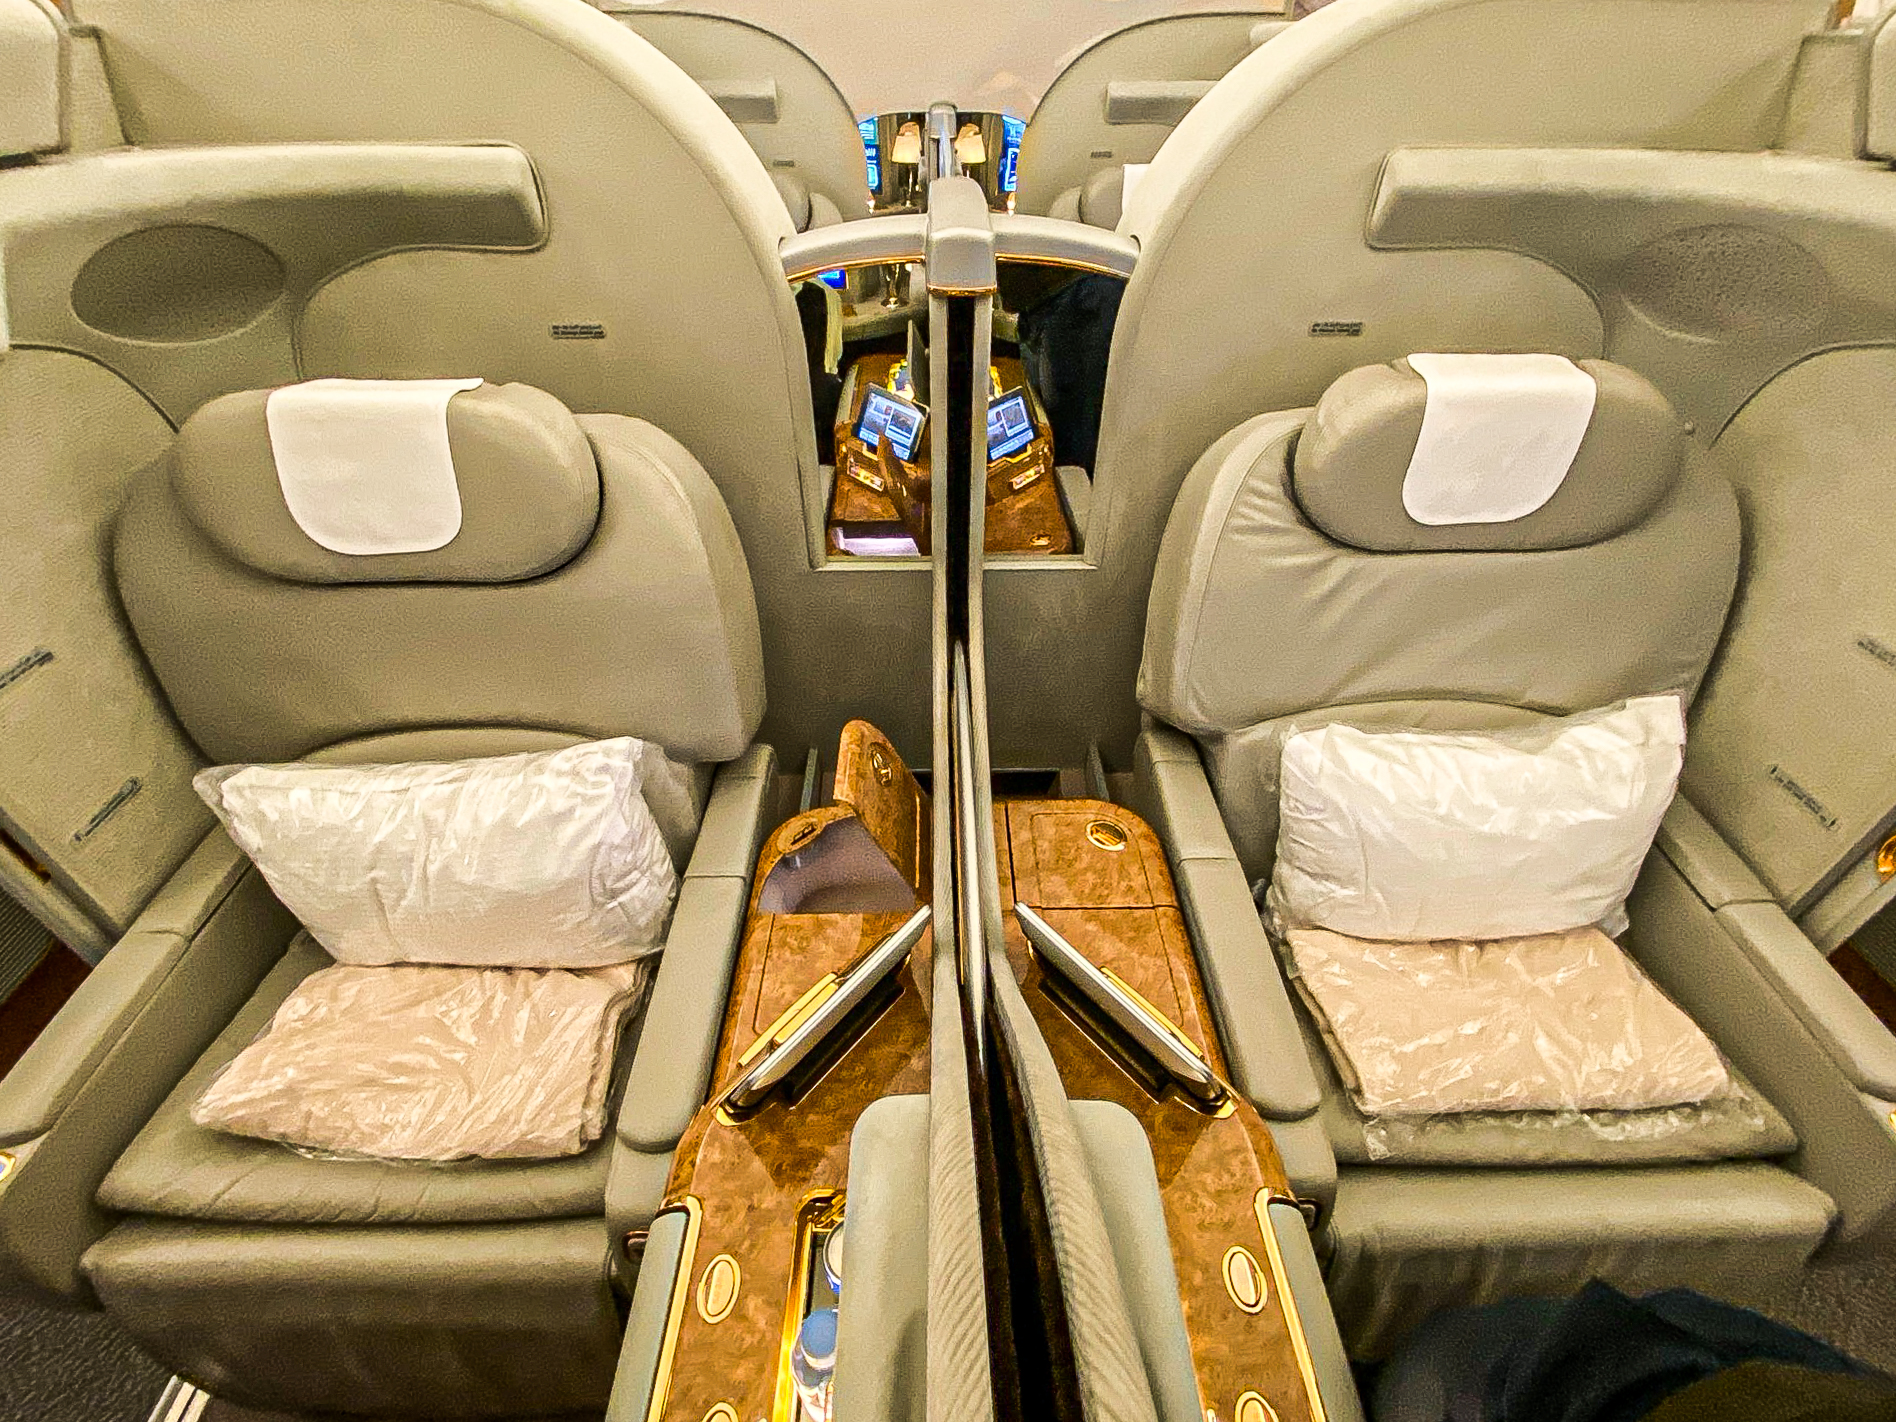 Emirates 777 First Class Middle Row Seats